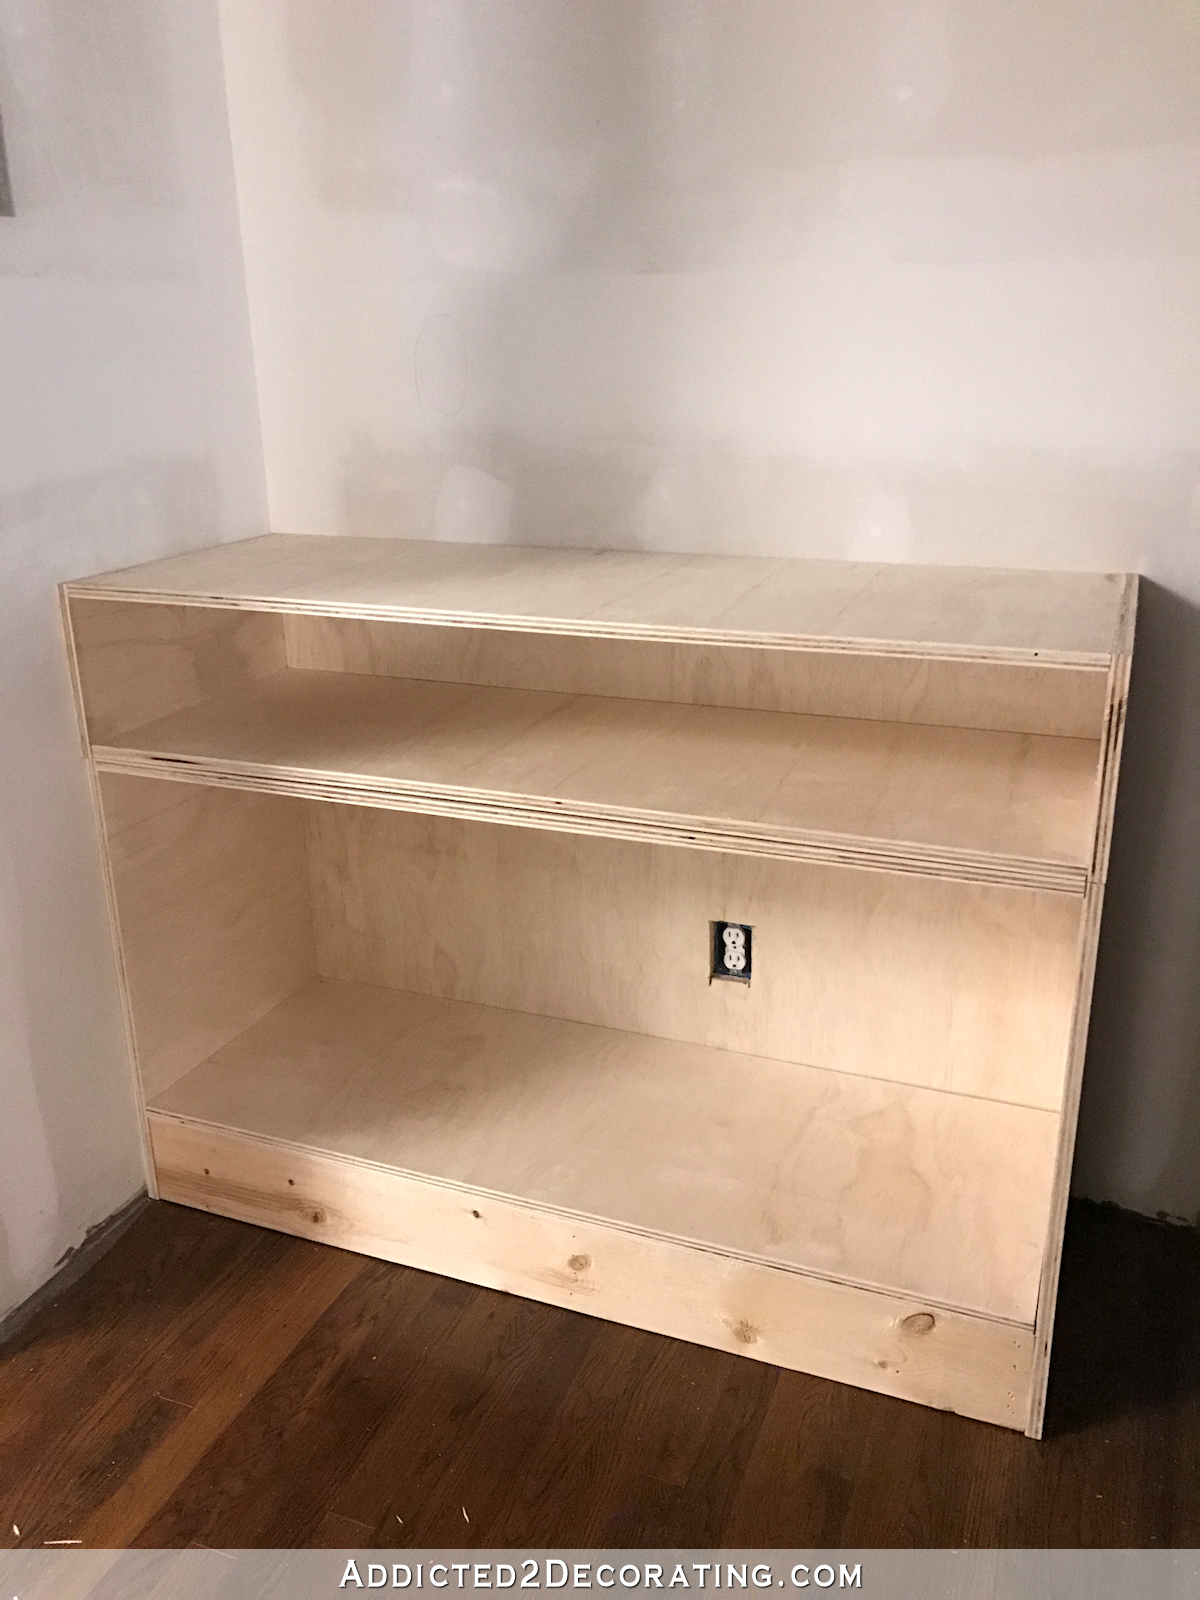 how to build cabinets- 12 - drawer section - stack drawer section on top of bottom cabinet section